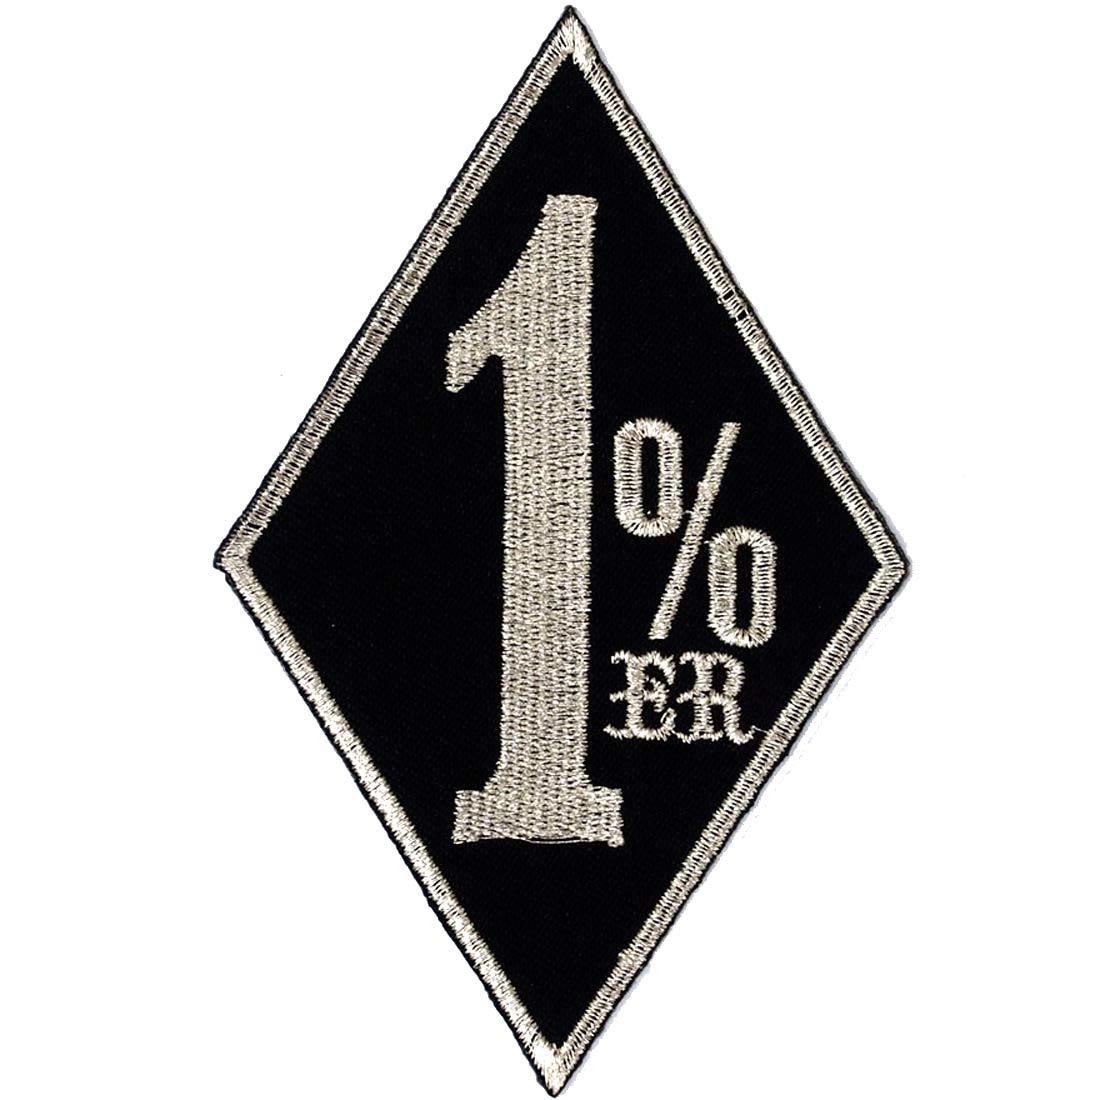 1 ONE Percenter Patch Silver Motorcycle Biker Embroidered Iron On